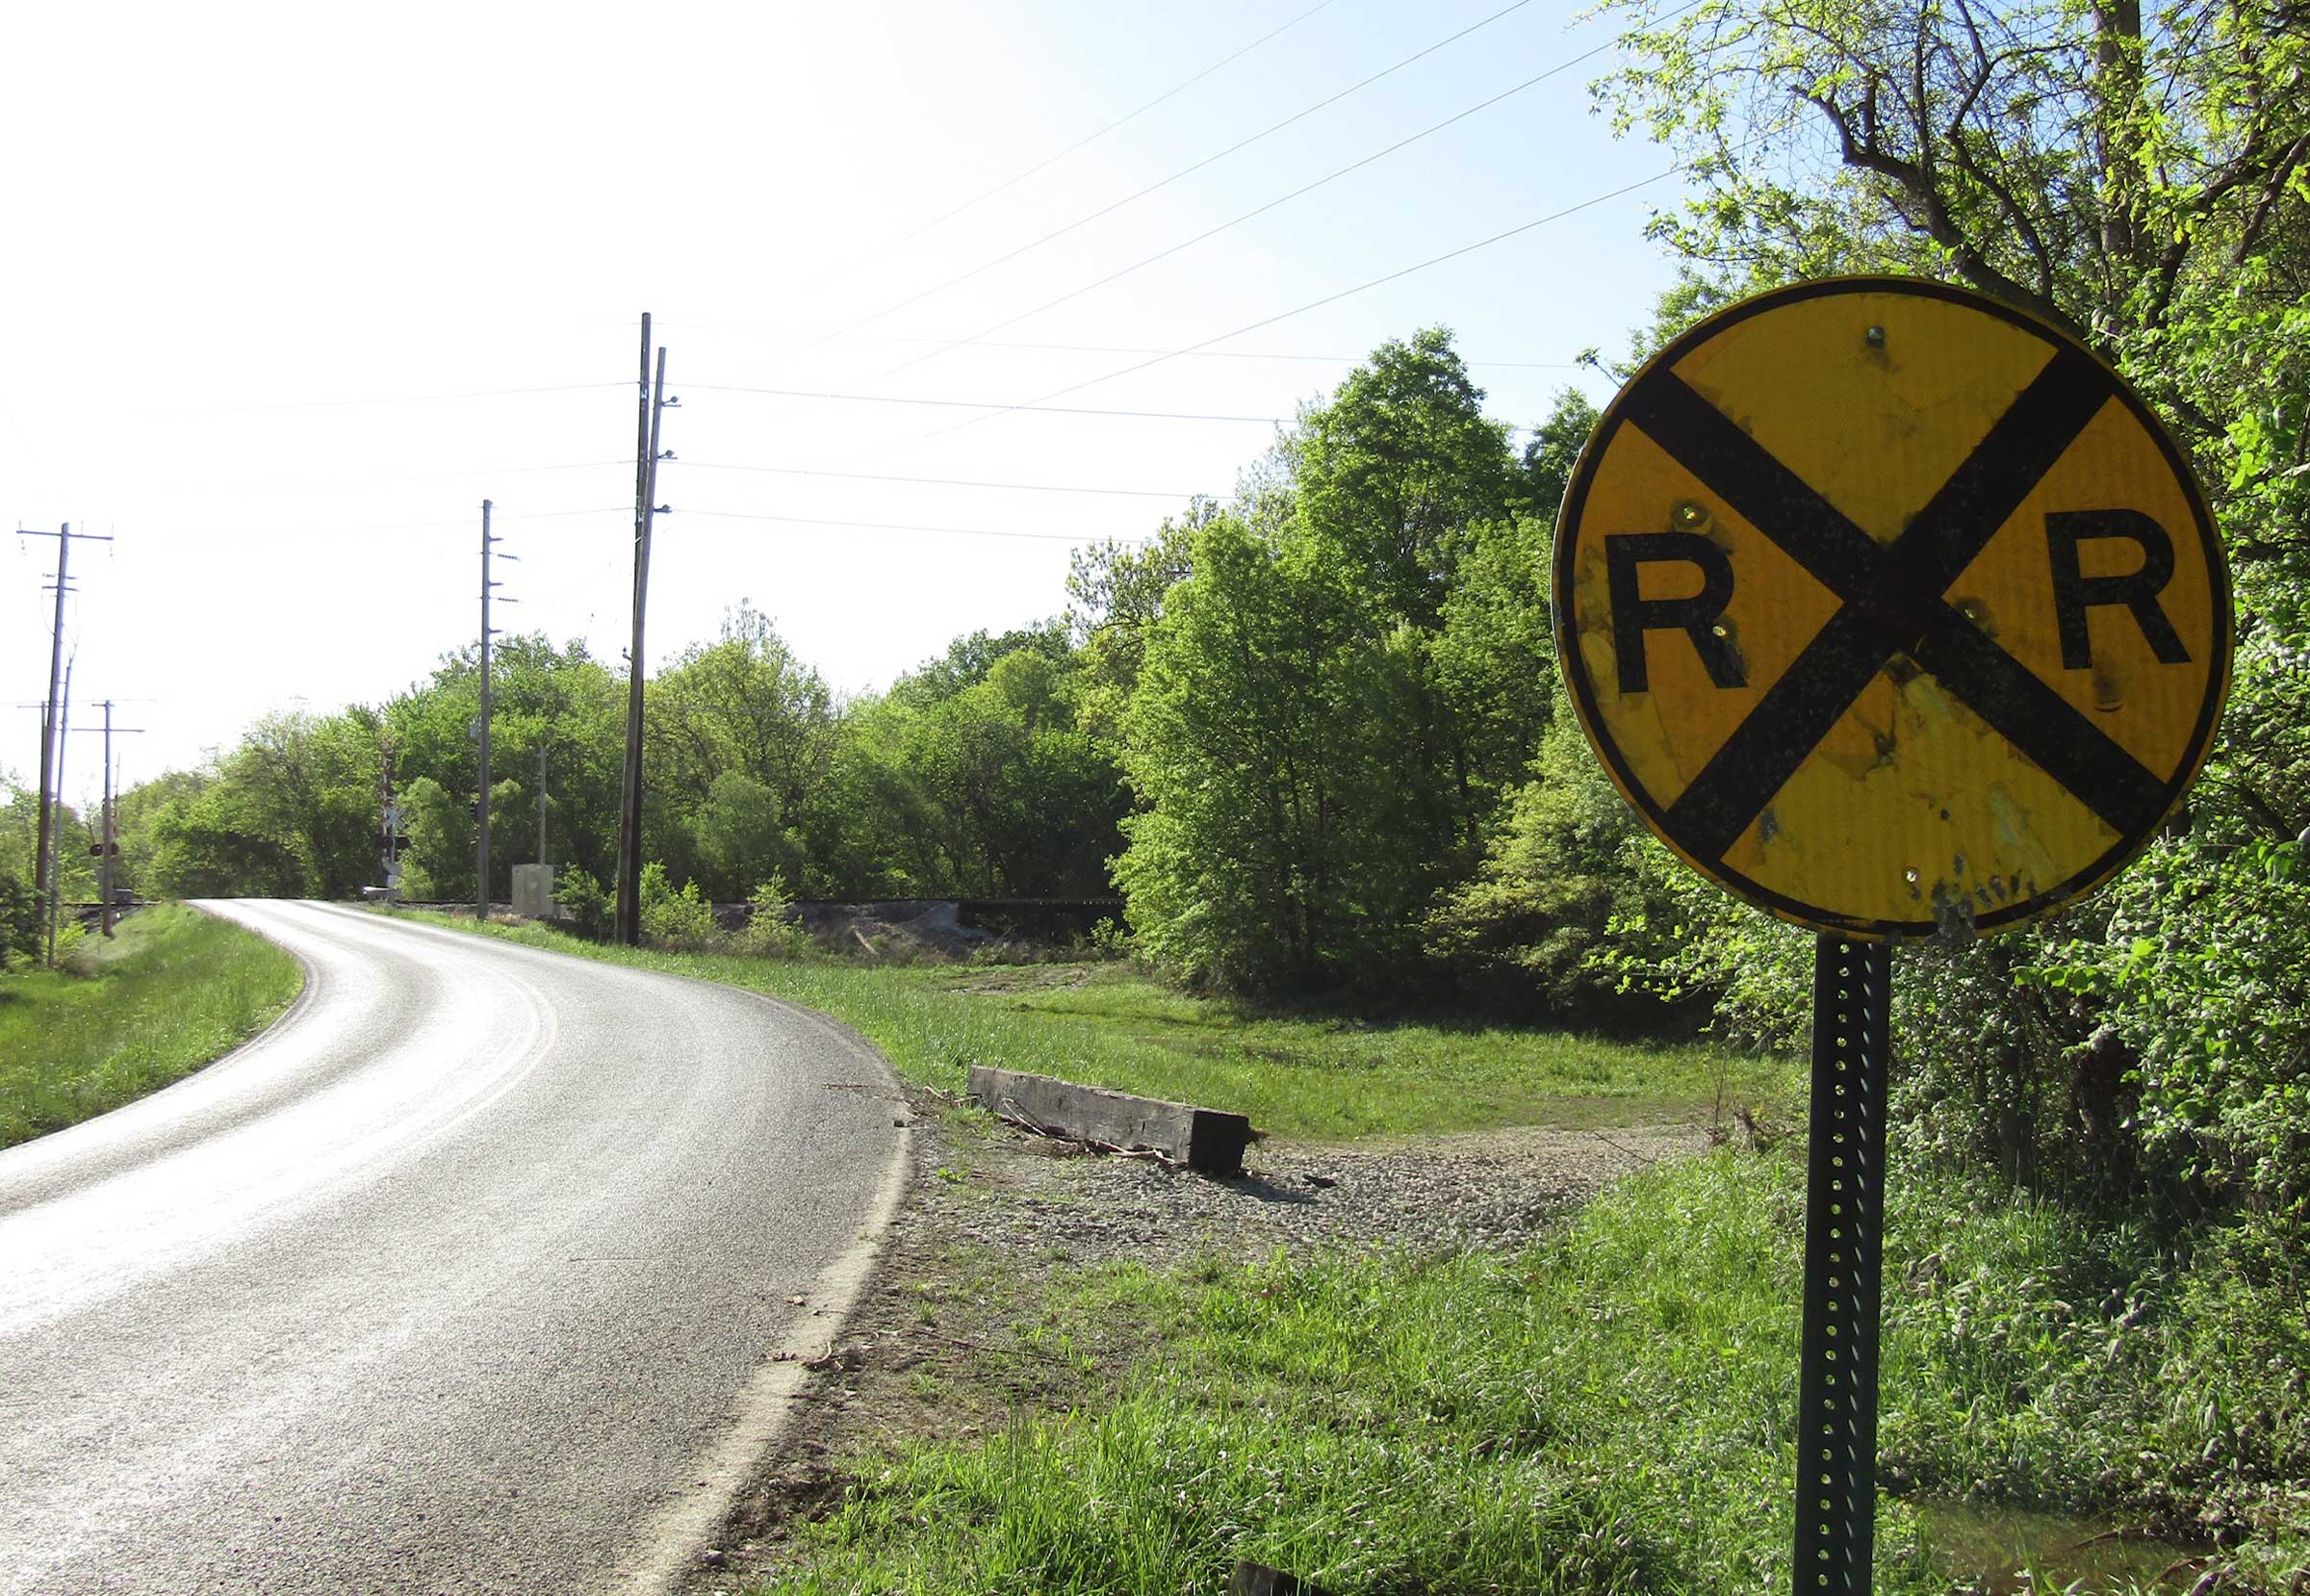 a yellow railroad crossing sign is in the foreground on the right third of the photo, with a gray road curving to the distance on the left side of the photo; in the background are green deciduous trees